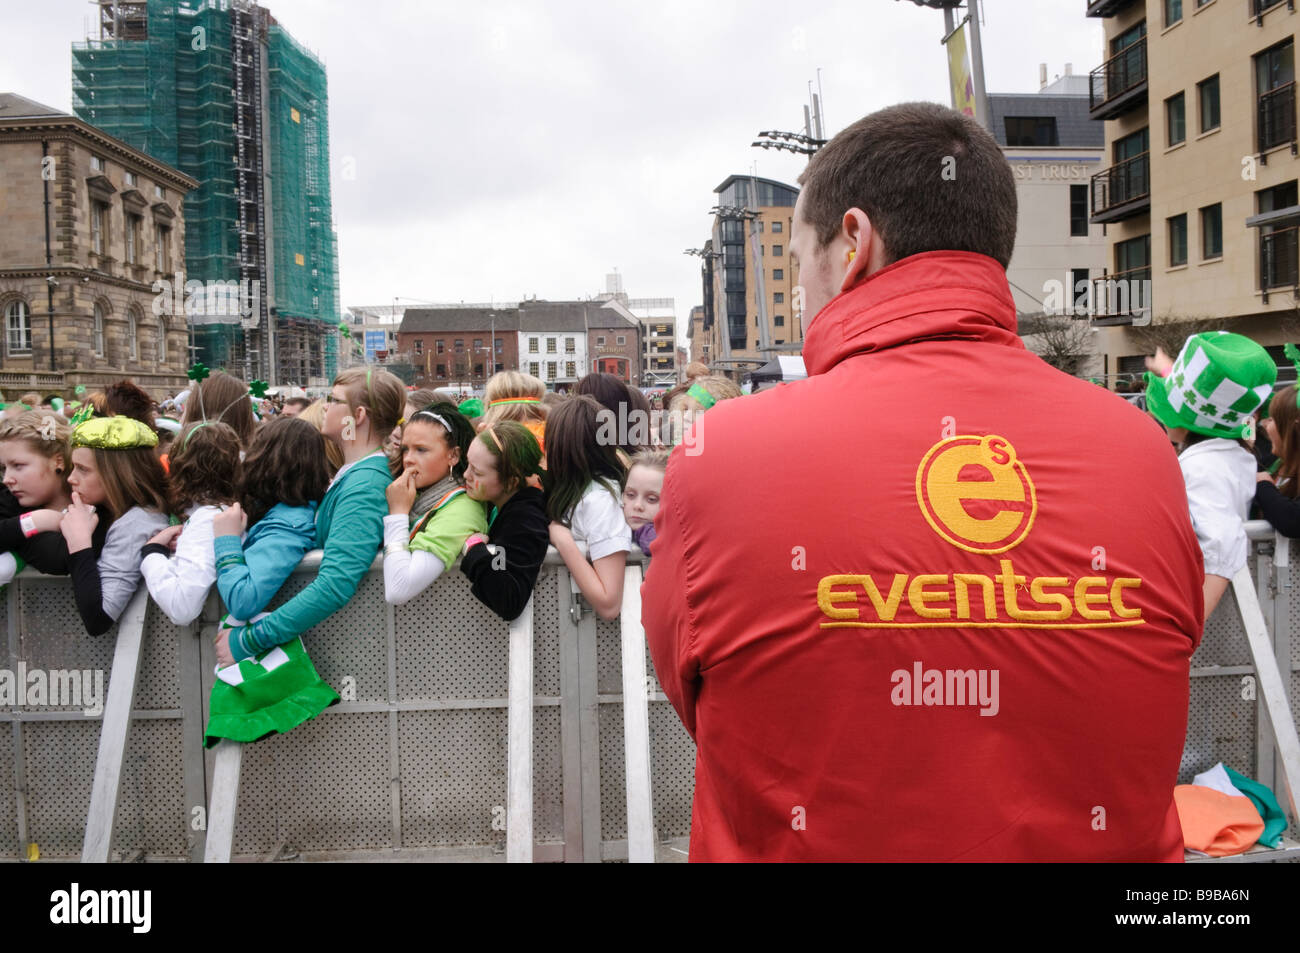 Eventsec security firm provides health, safety and security protection at a concert in Belfast, 2009. Stock Photo